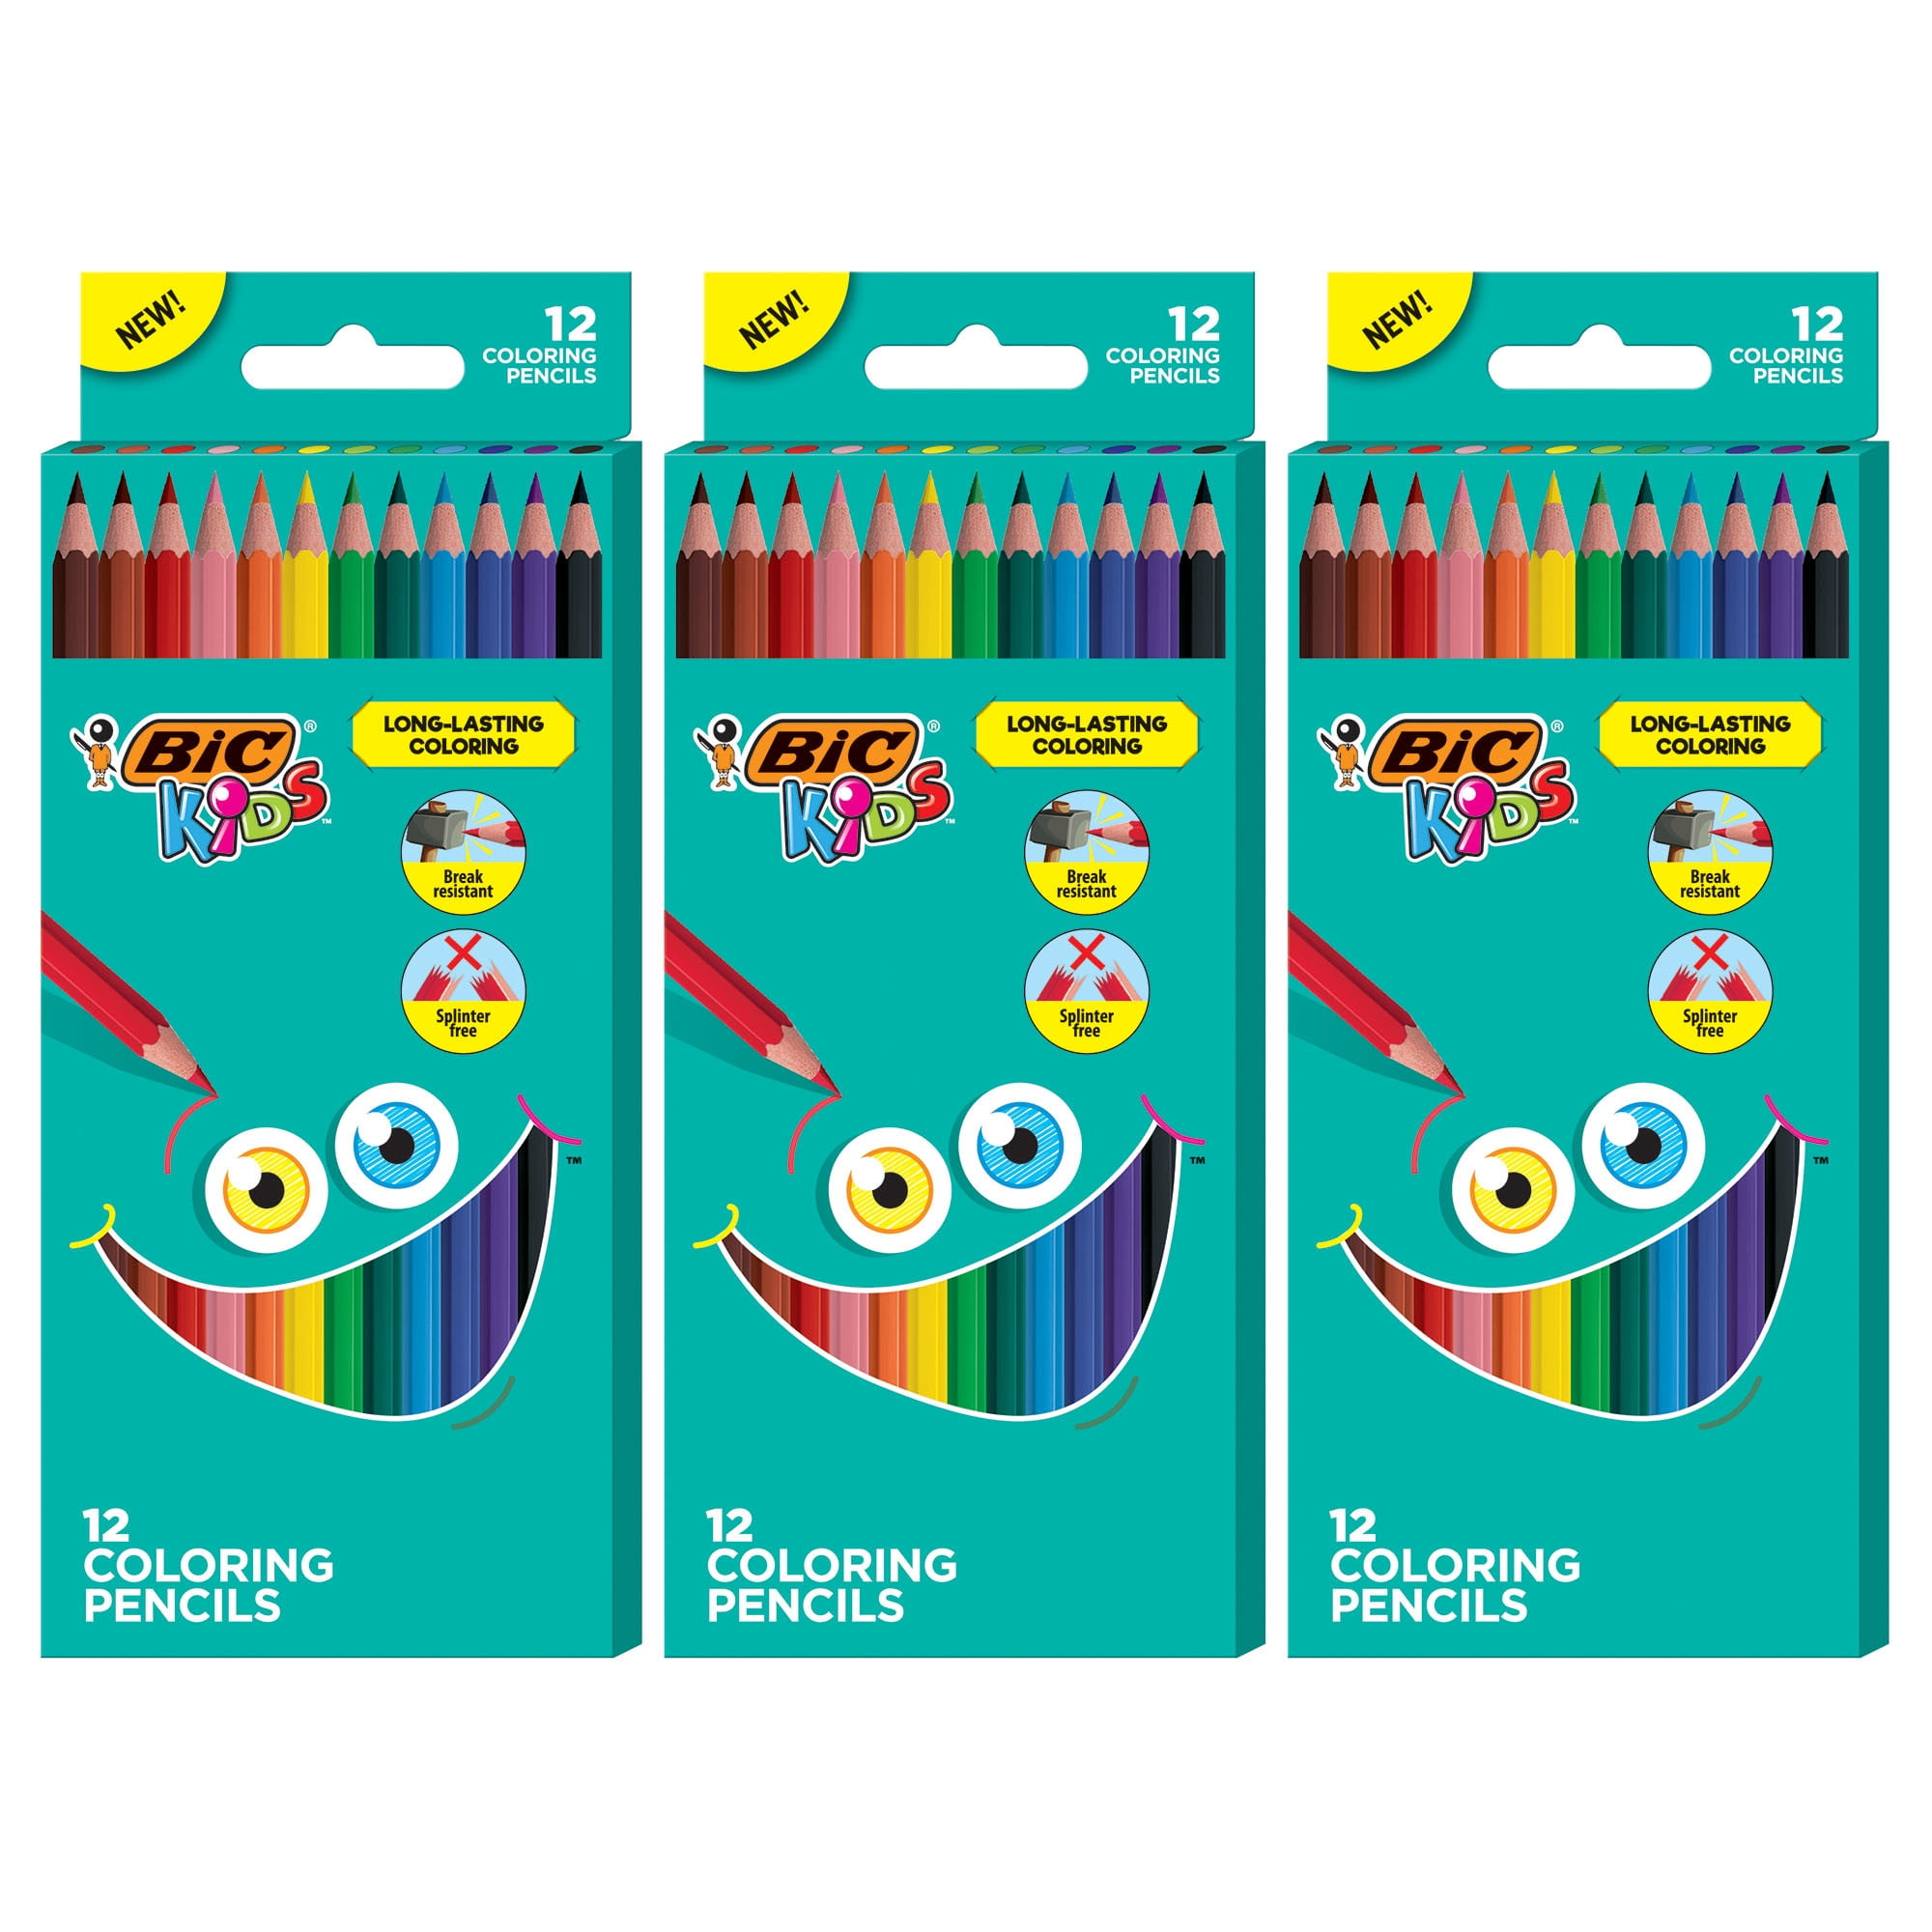 New 3 Packs of 12 Colored Pencils Assorted Colors Kids Coloring Pencils 